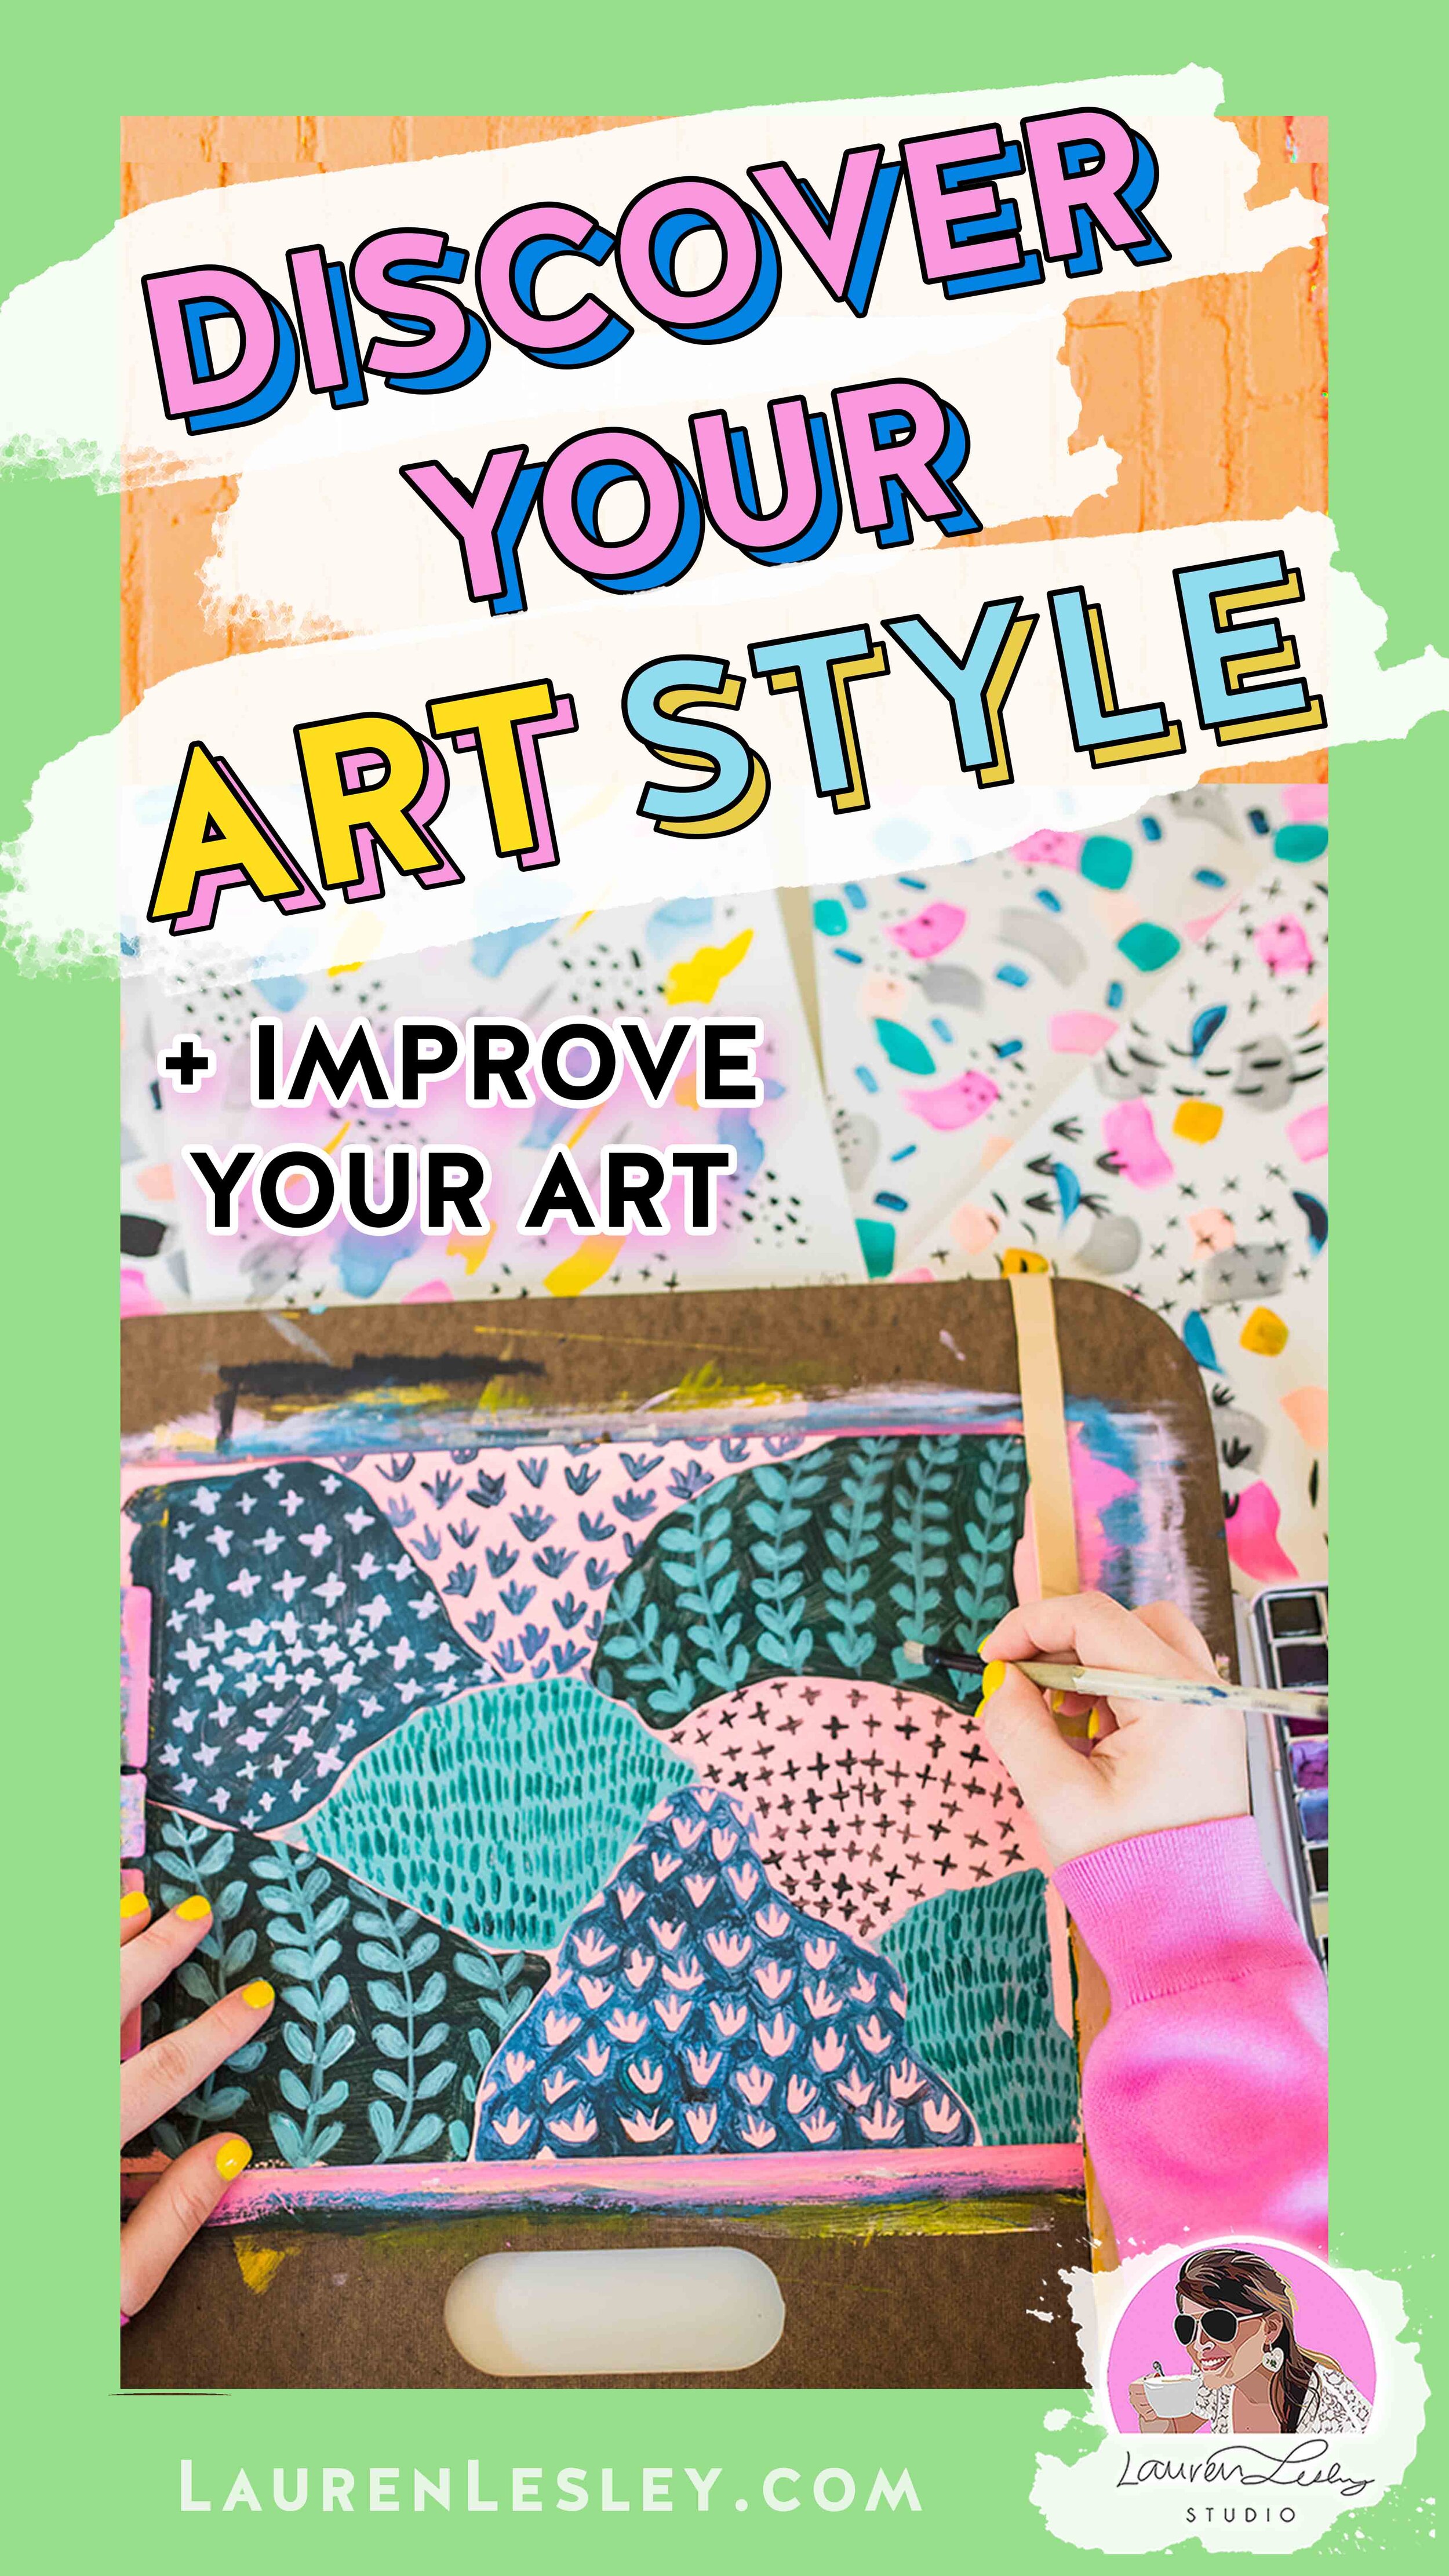 Tips for Finding Your Artistic Style